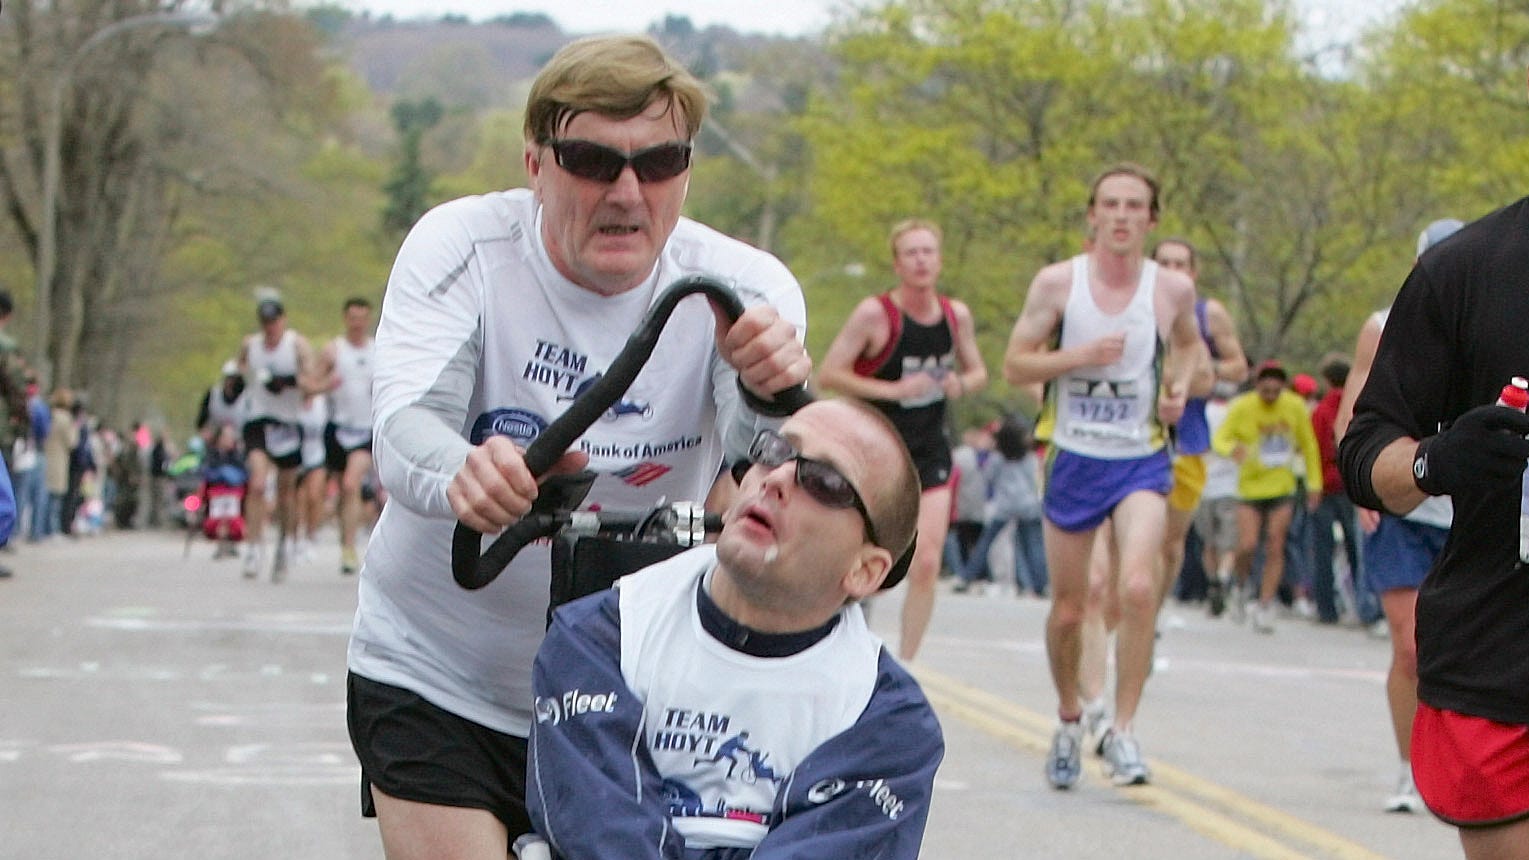 Dick Hoyt, Boston Marathon 'icon' who pushed son in races, dies at 80